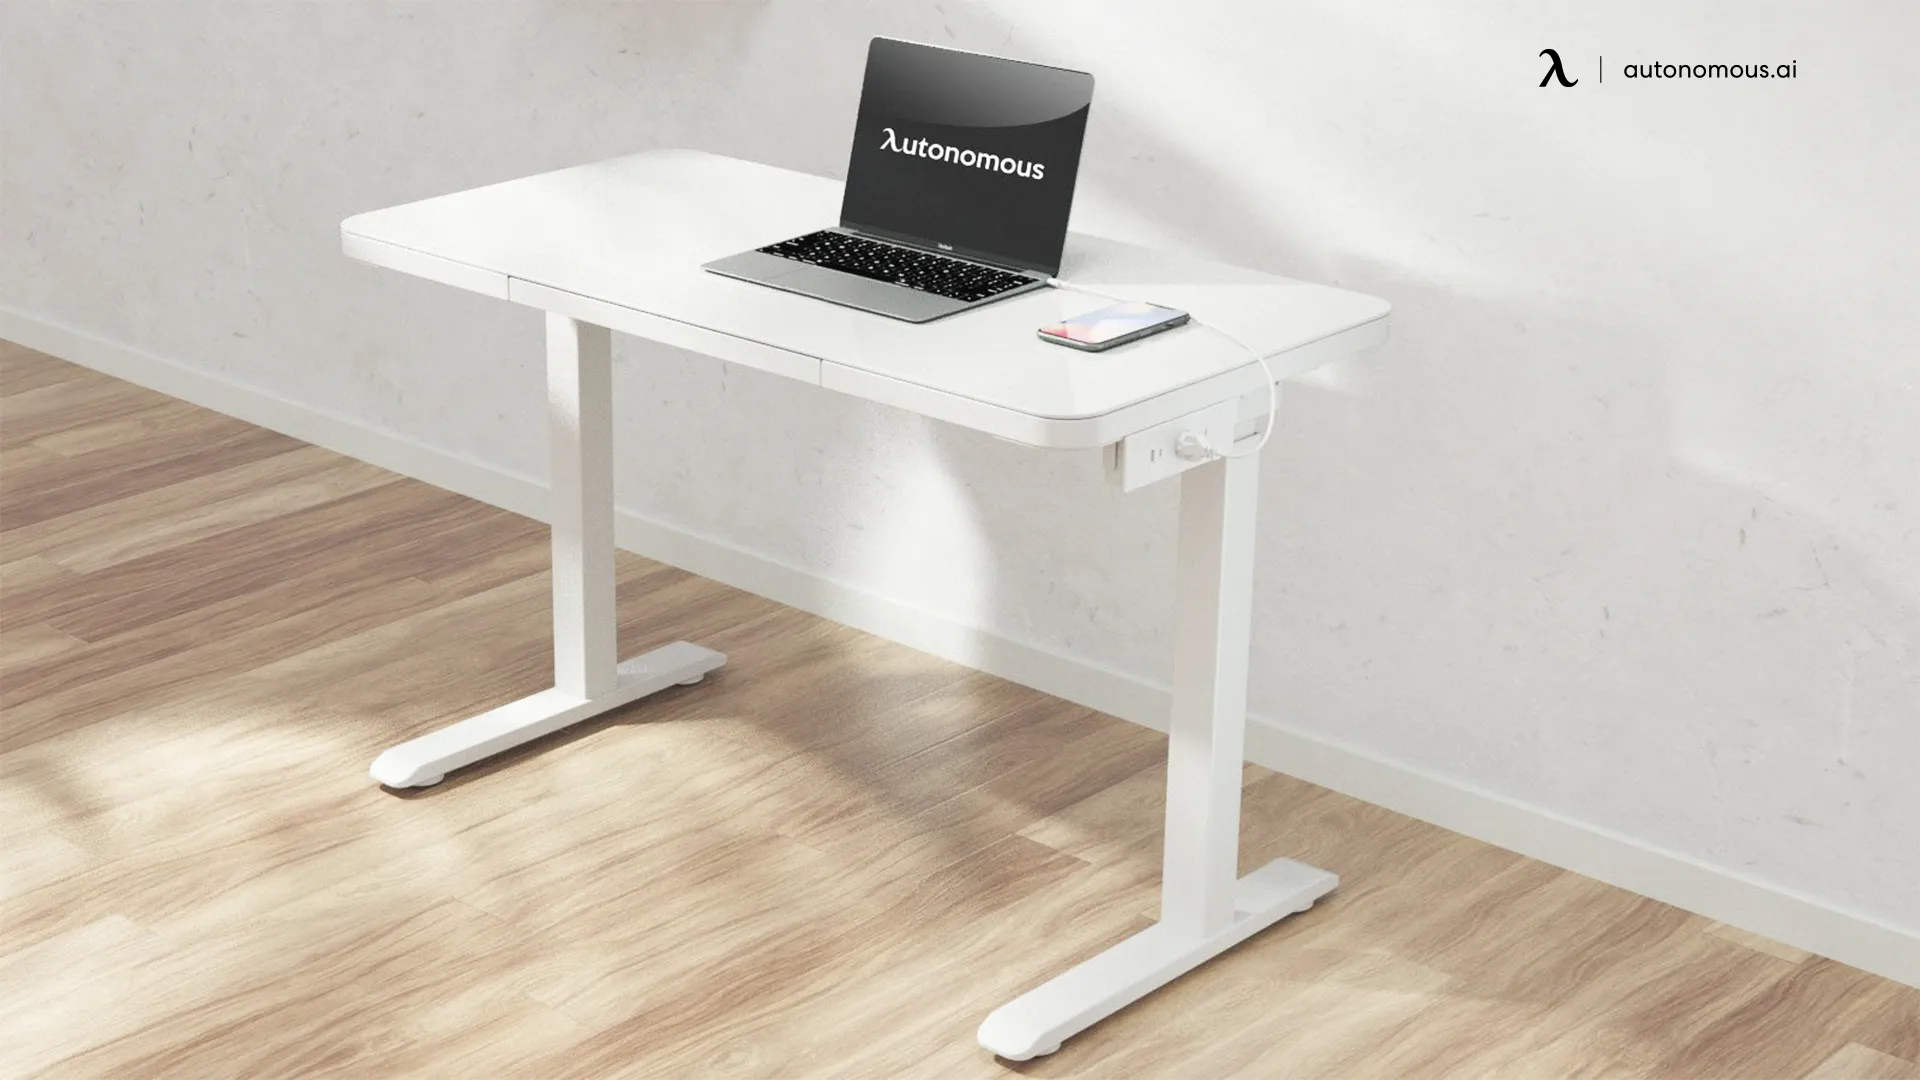 Benefits of Using a Desk with Wireless Charging